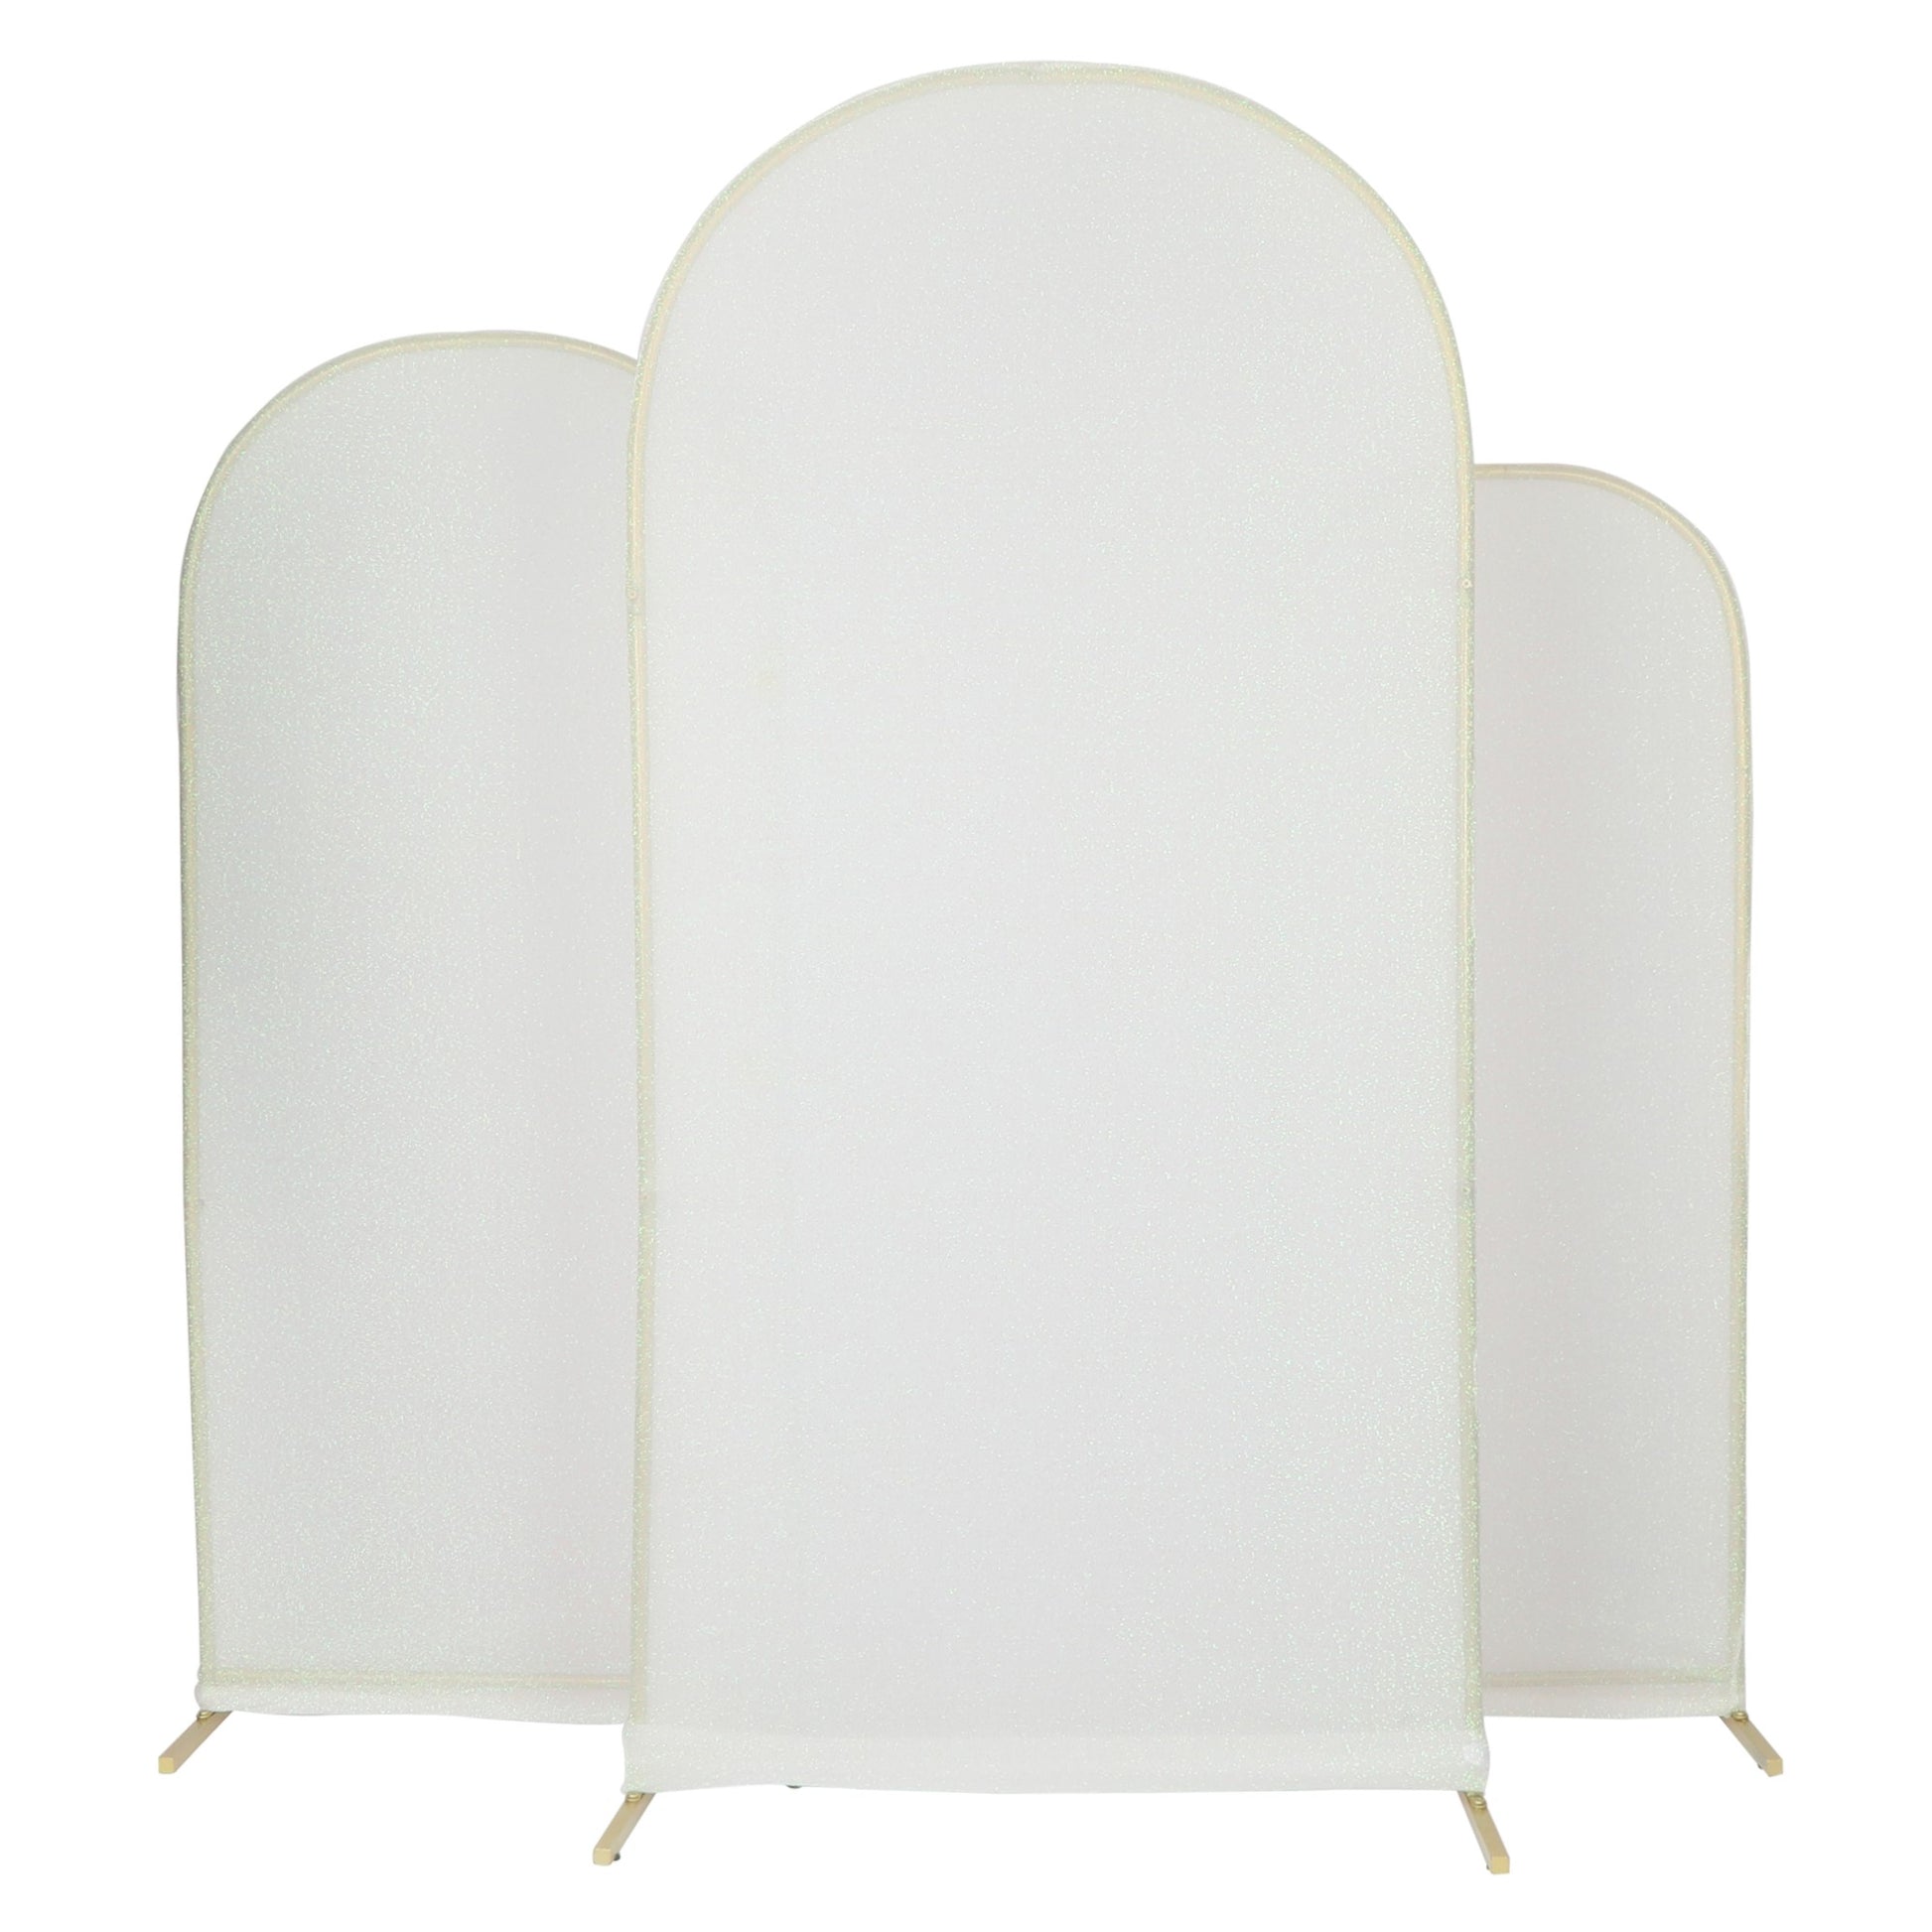 Shimmer Spandex Covers for Trio Arch Frame Backdrop 3pc/set - Iridescent White